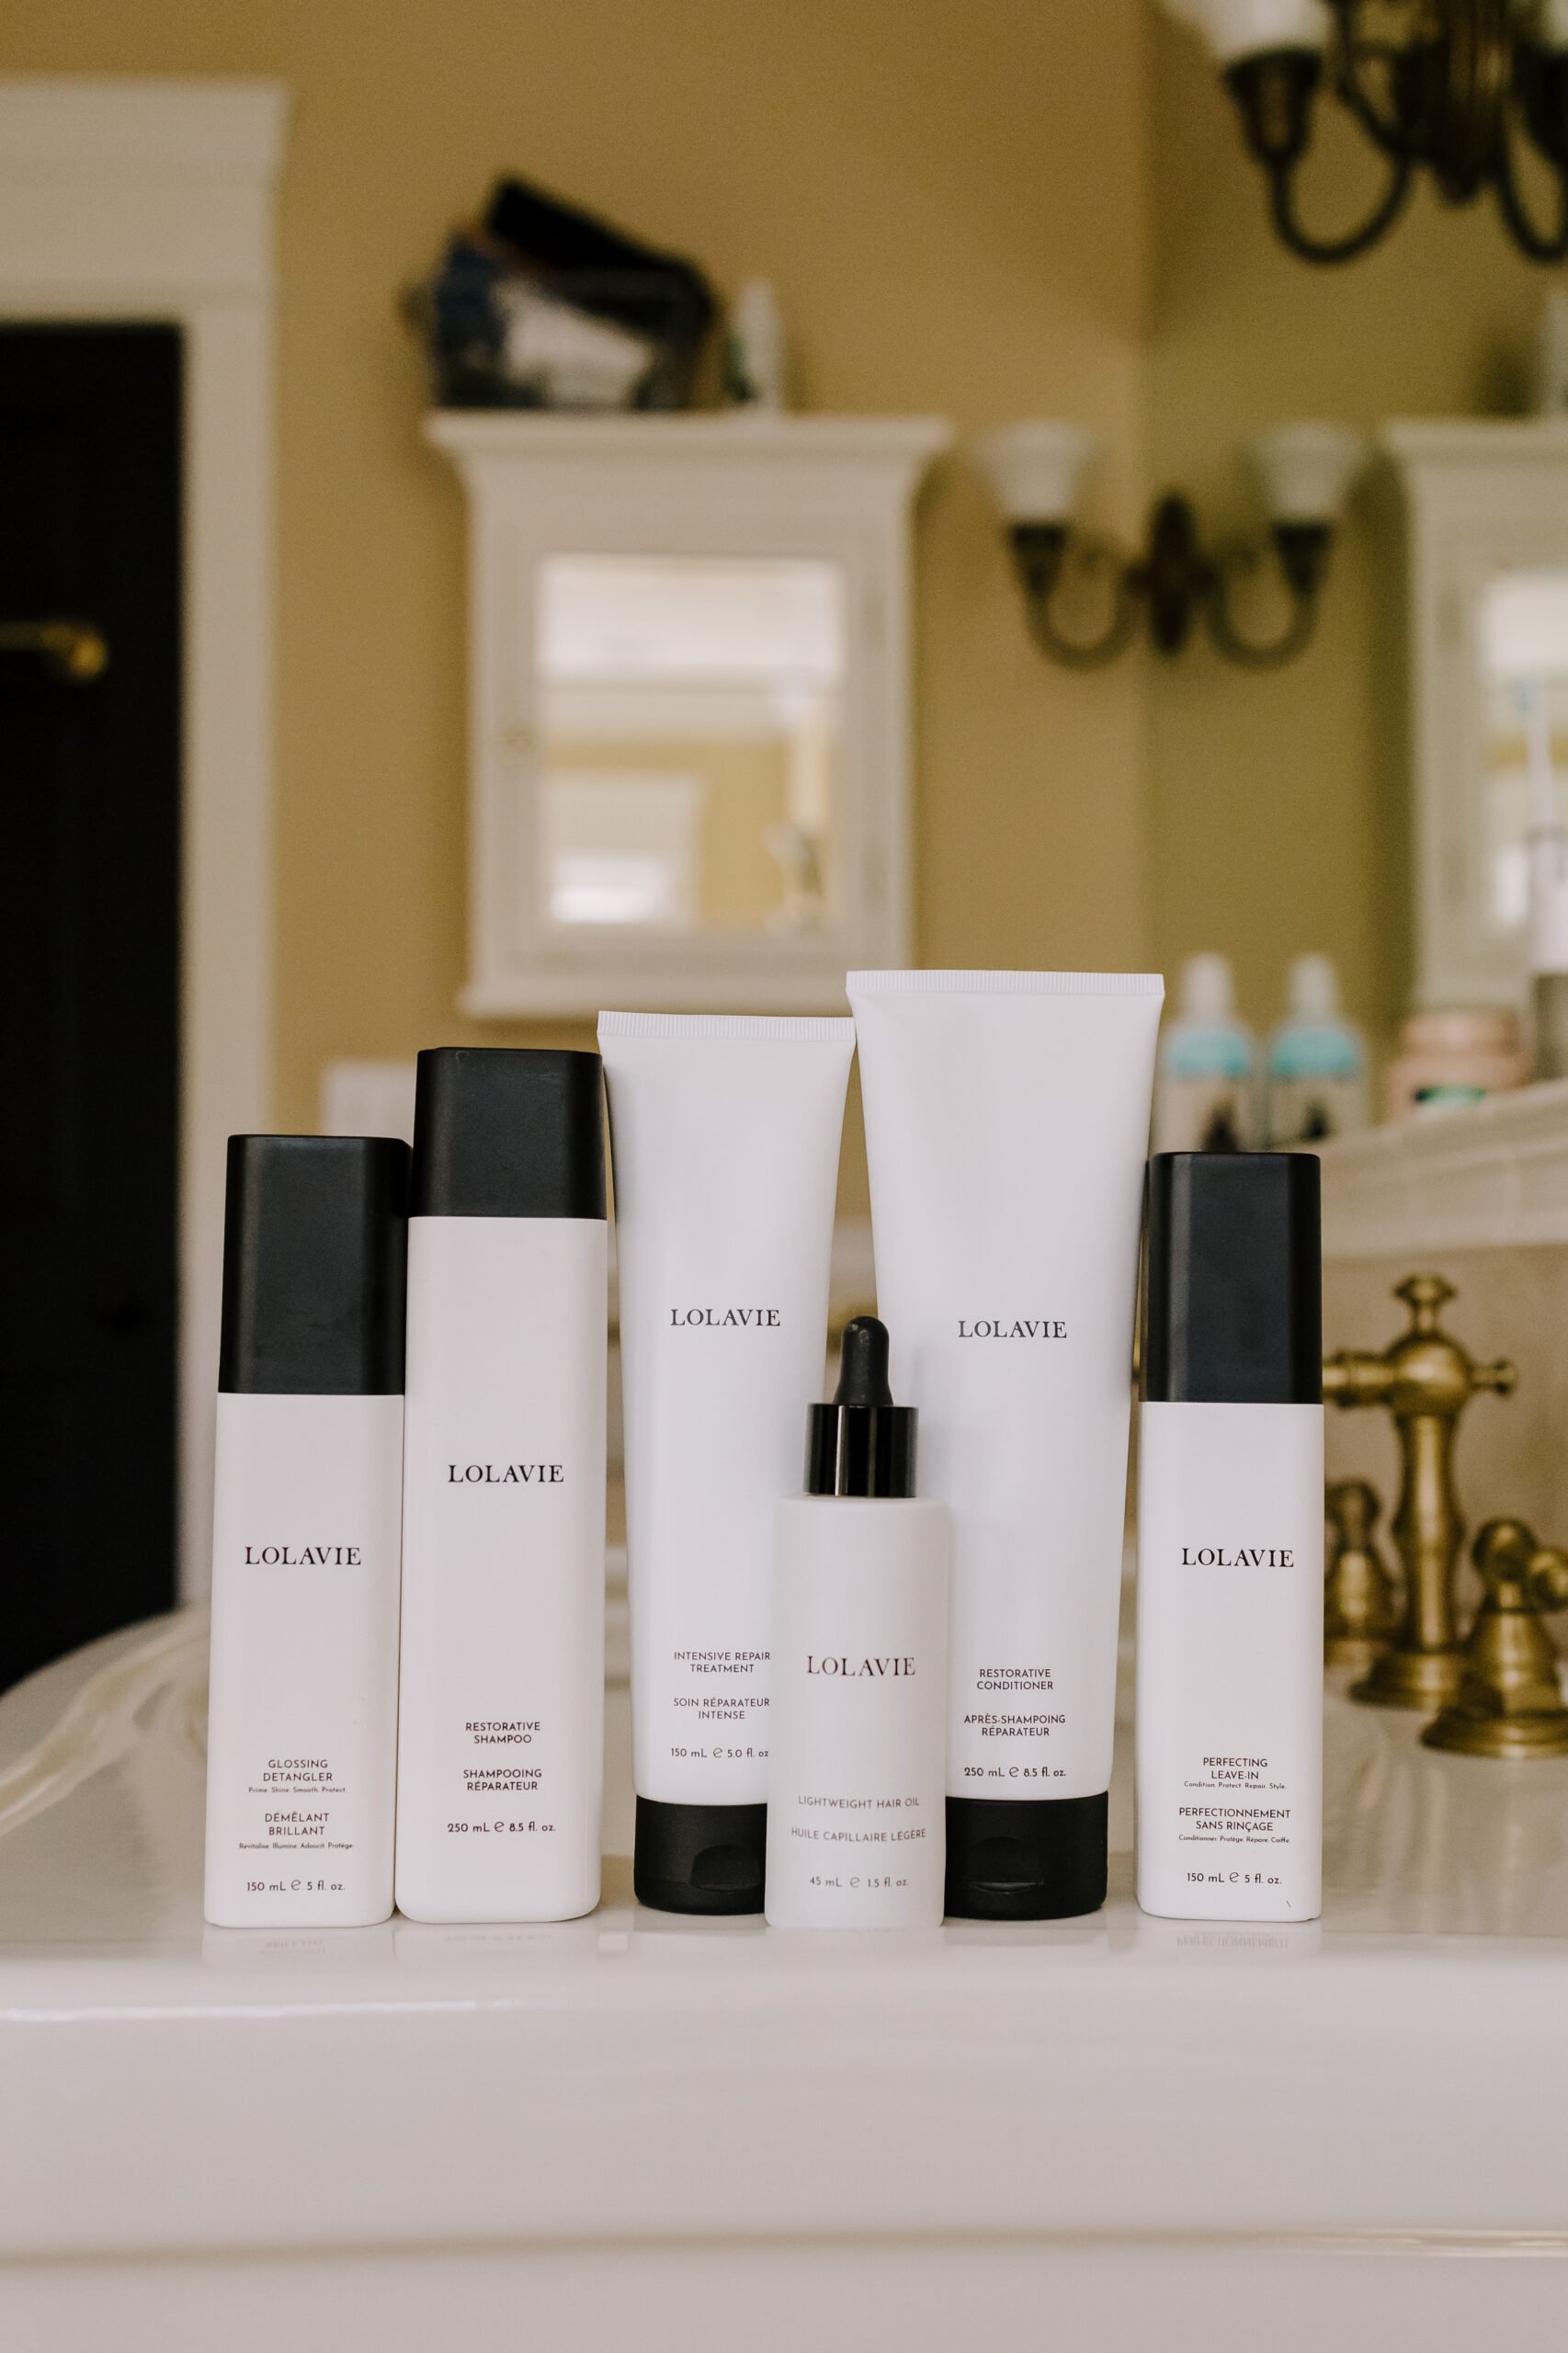 A line up of LolaVie products. 